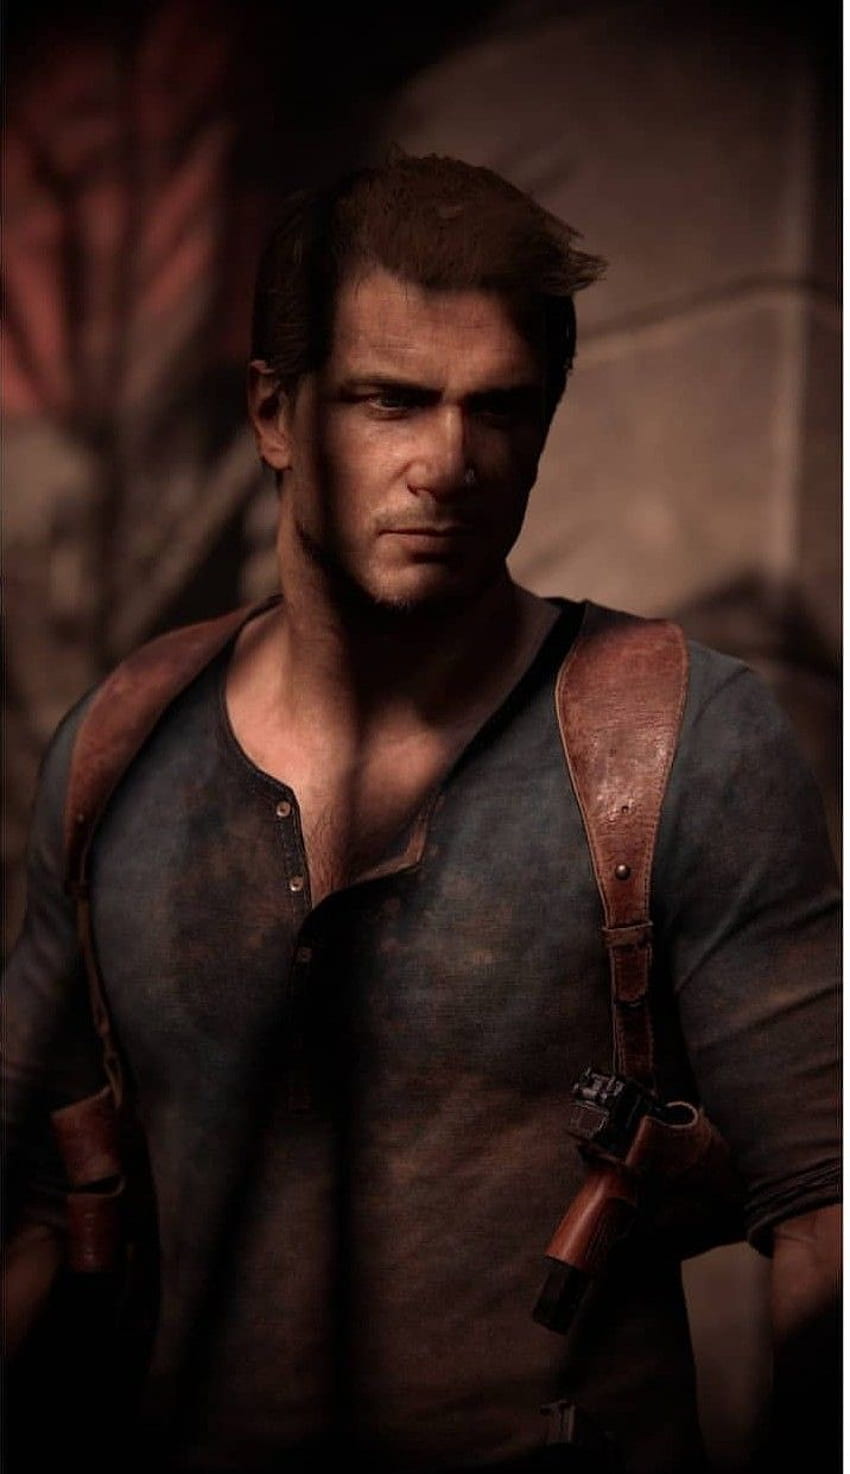 Uncharted 4 A Thief's End Nathan Drake Wallpaper by SameerHD on